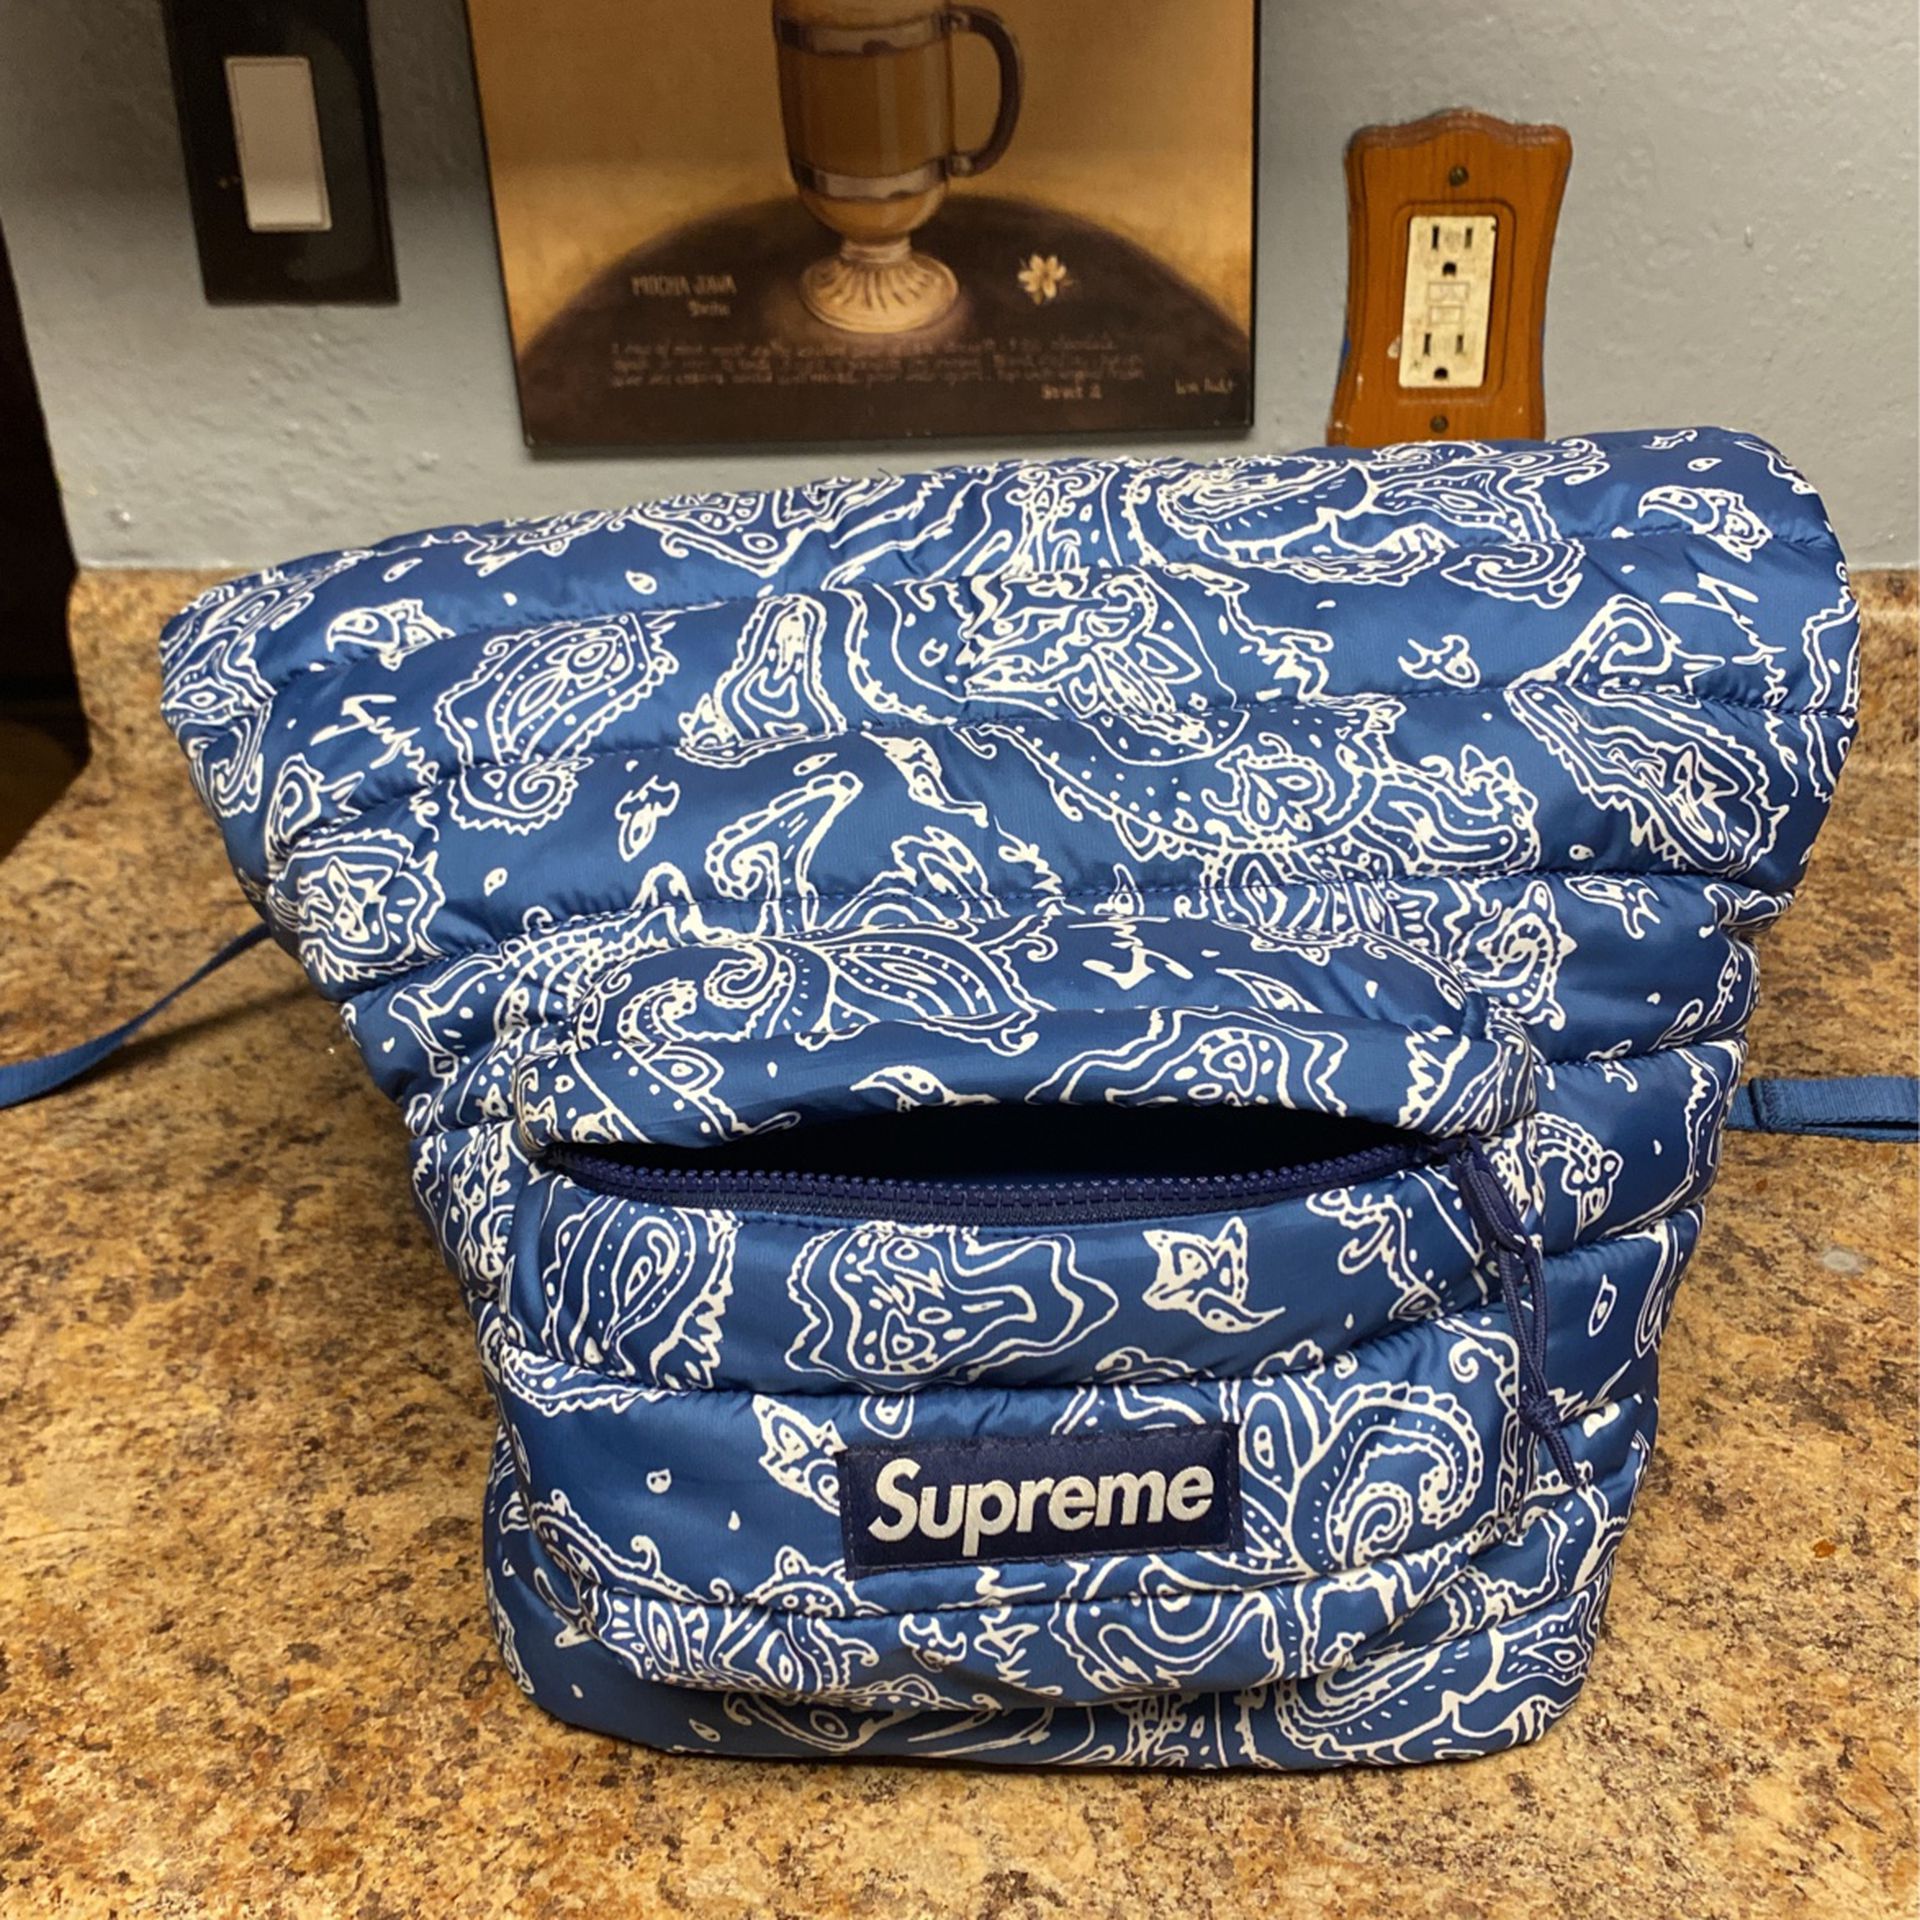 Limited Edition Supreme Bag for Sale in Bellflower, CA - OfferUp